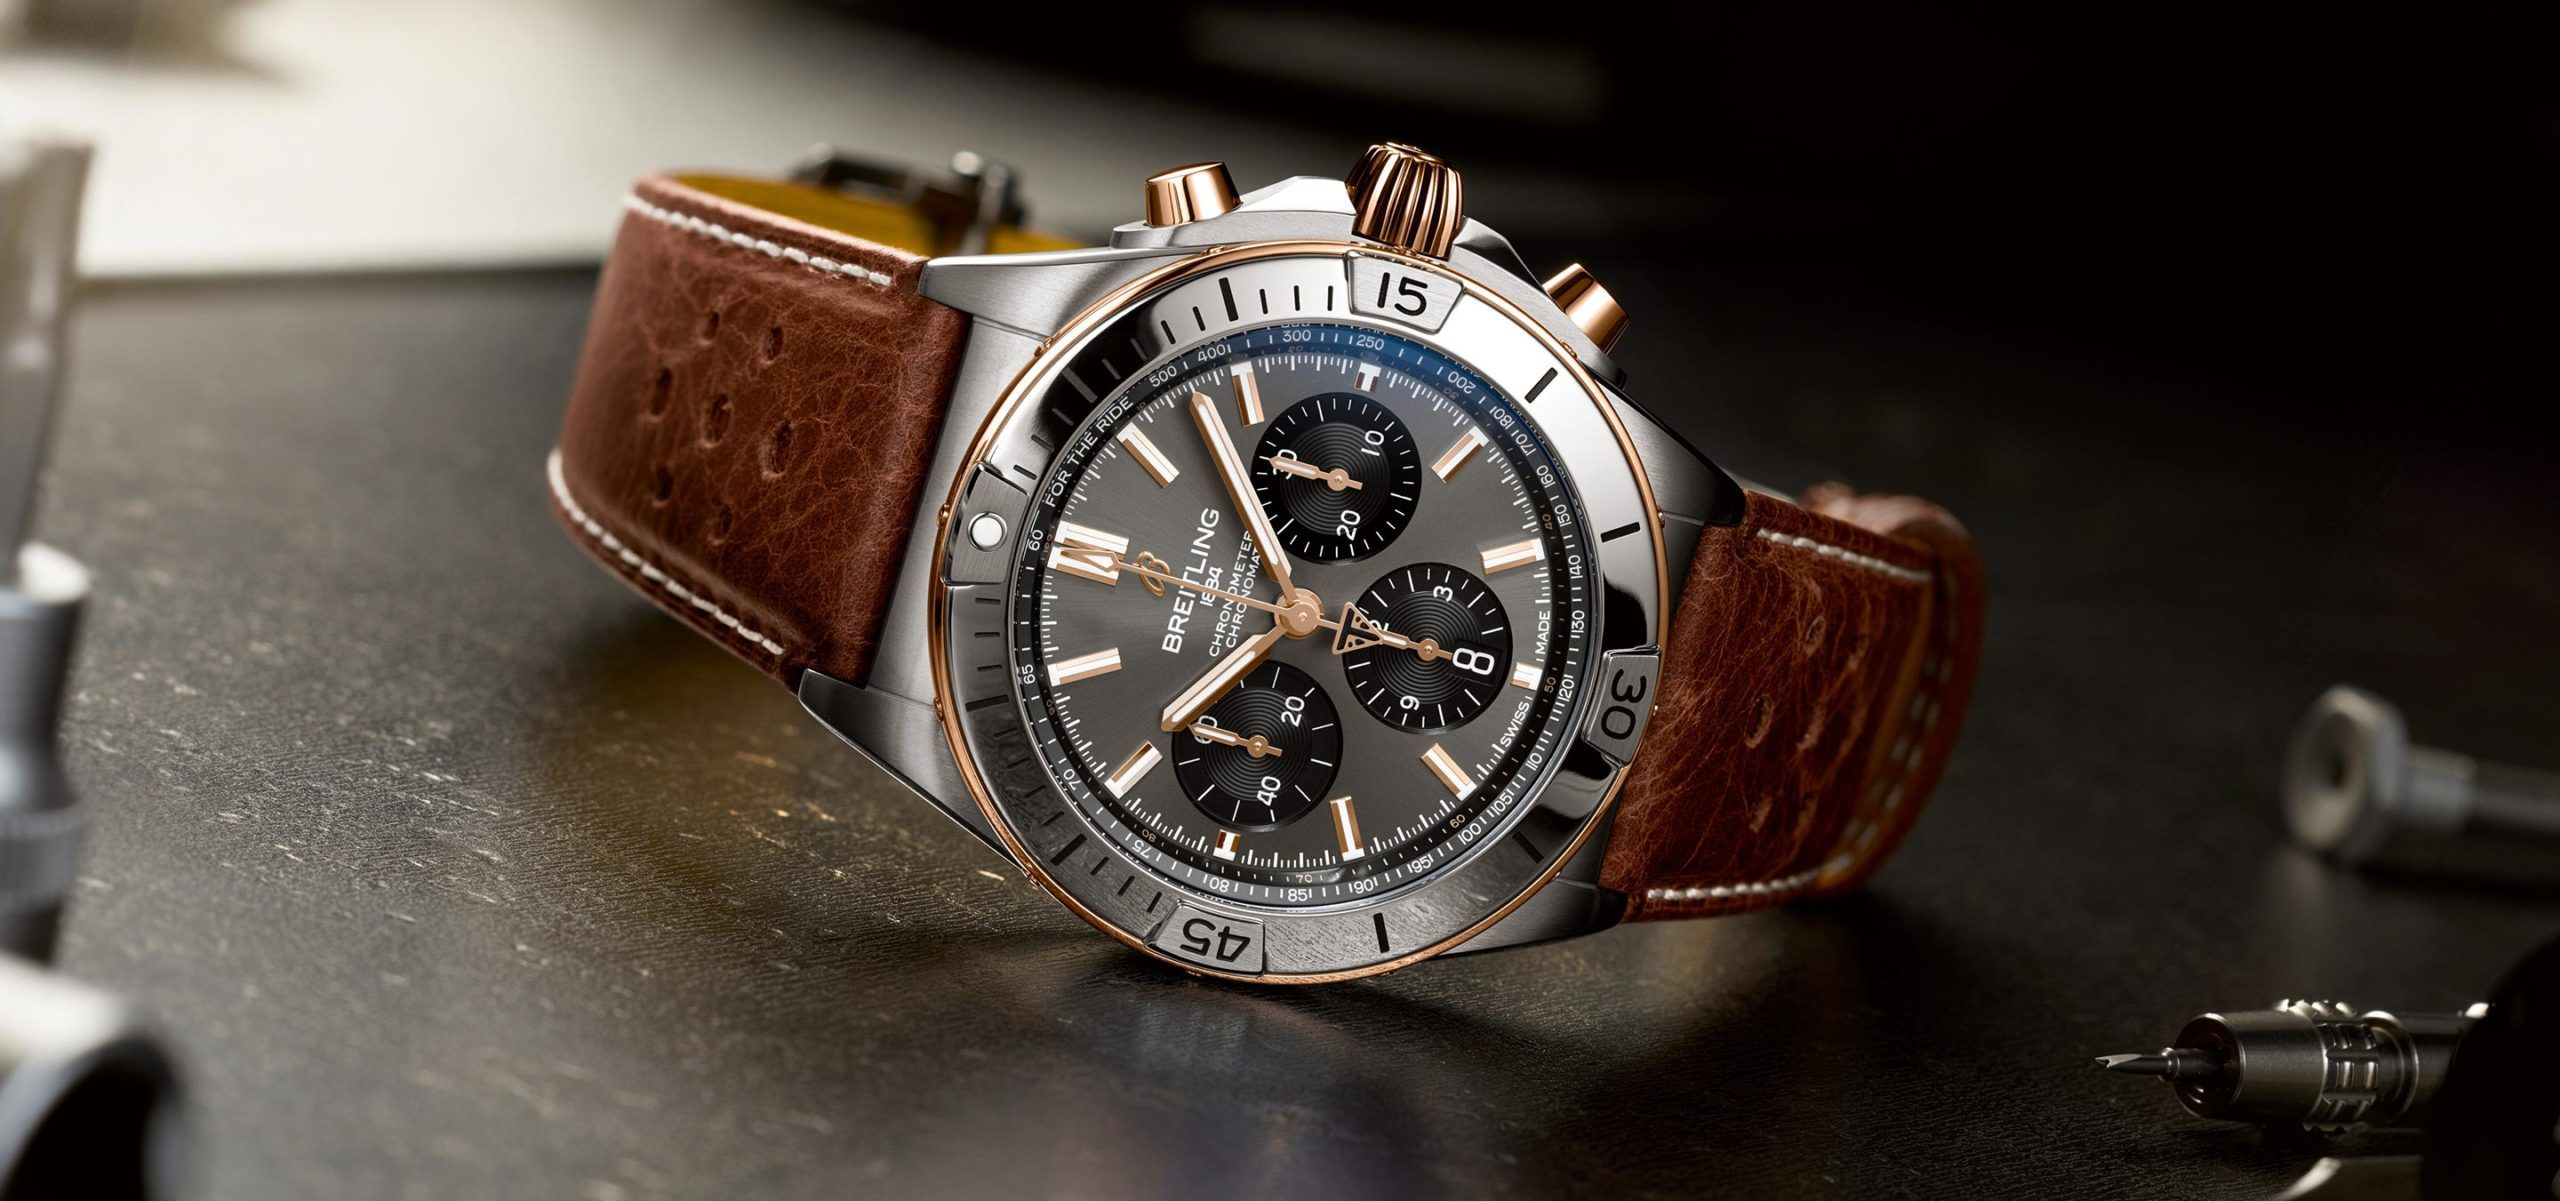 It's Time To Triumph: Introducing The Breitling Chronomat B01 42 Triumph